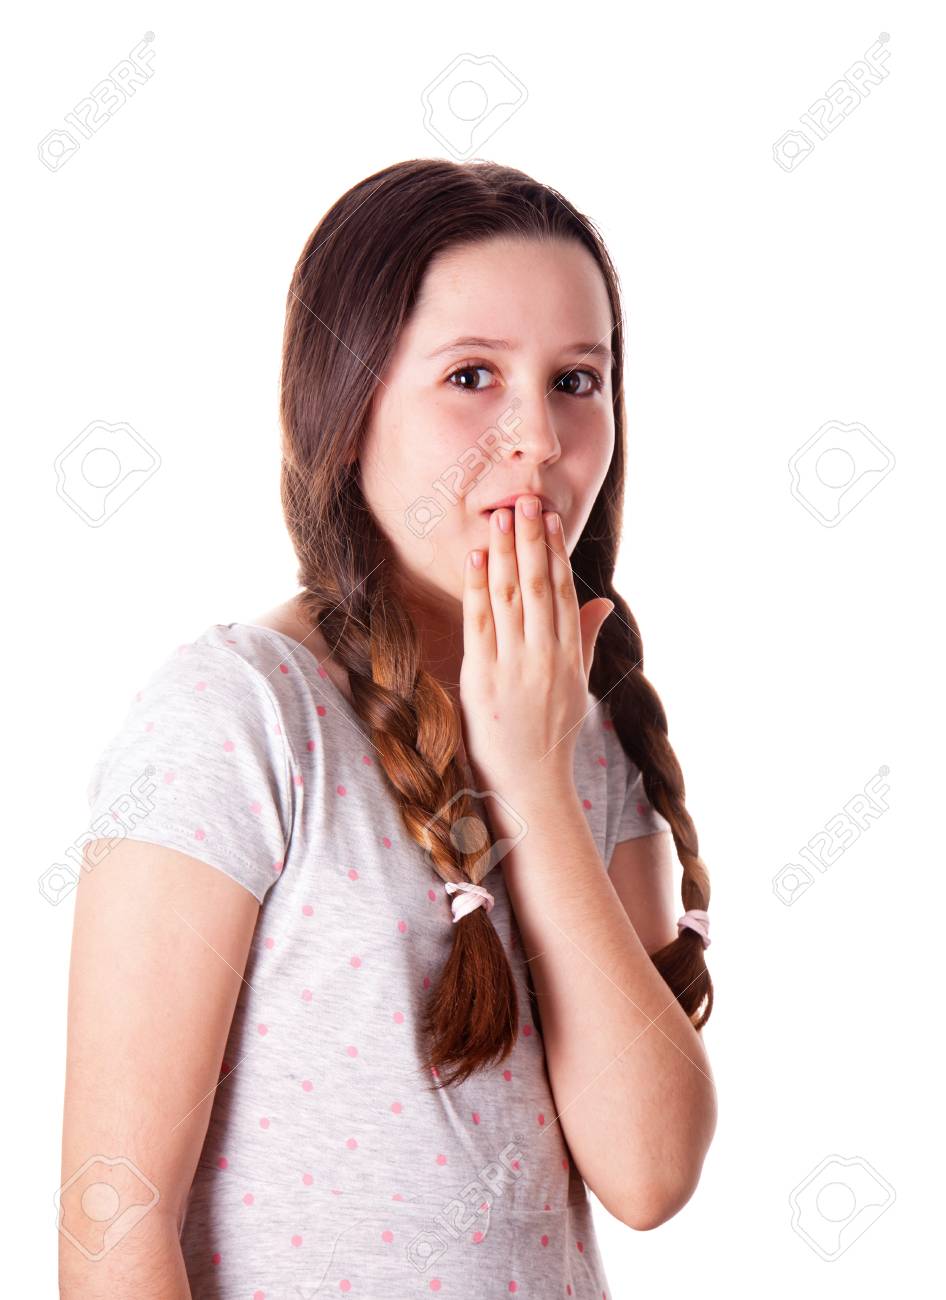 Young Girl Looking Shocked Or Surprised Over The White Background